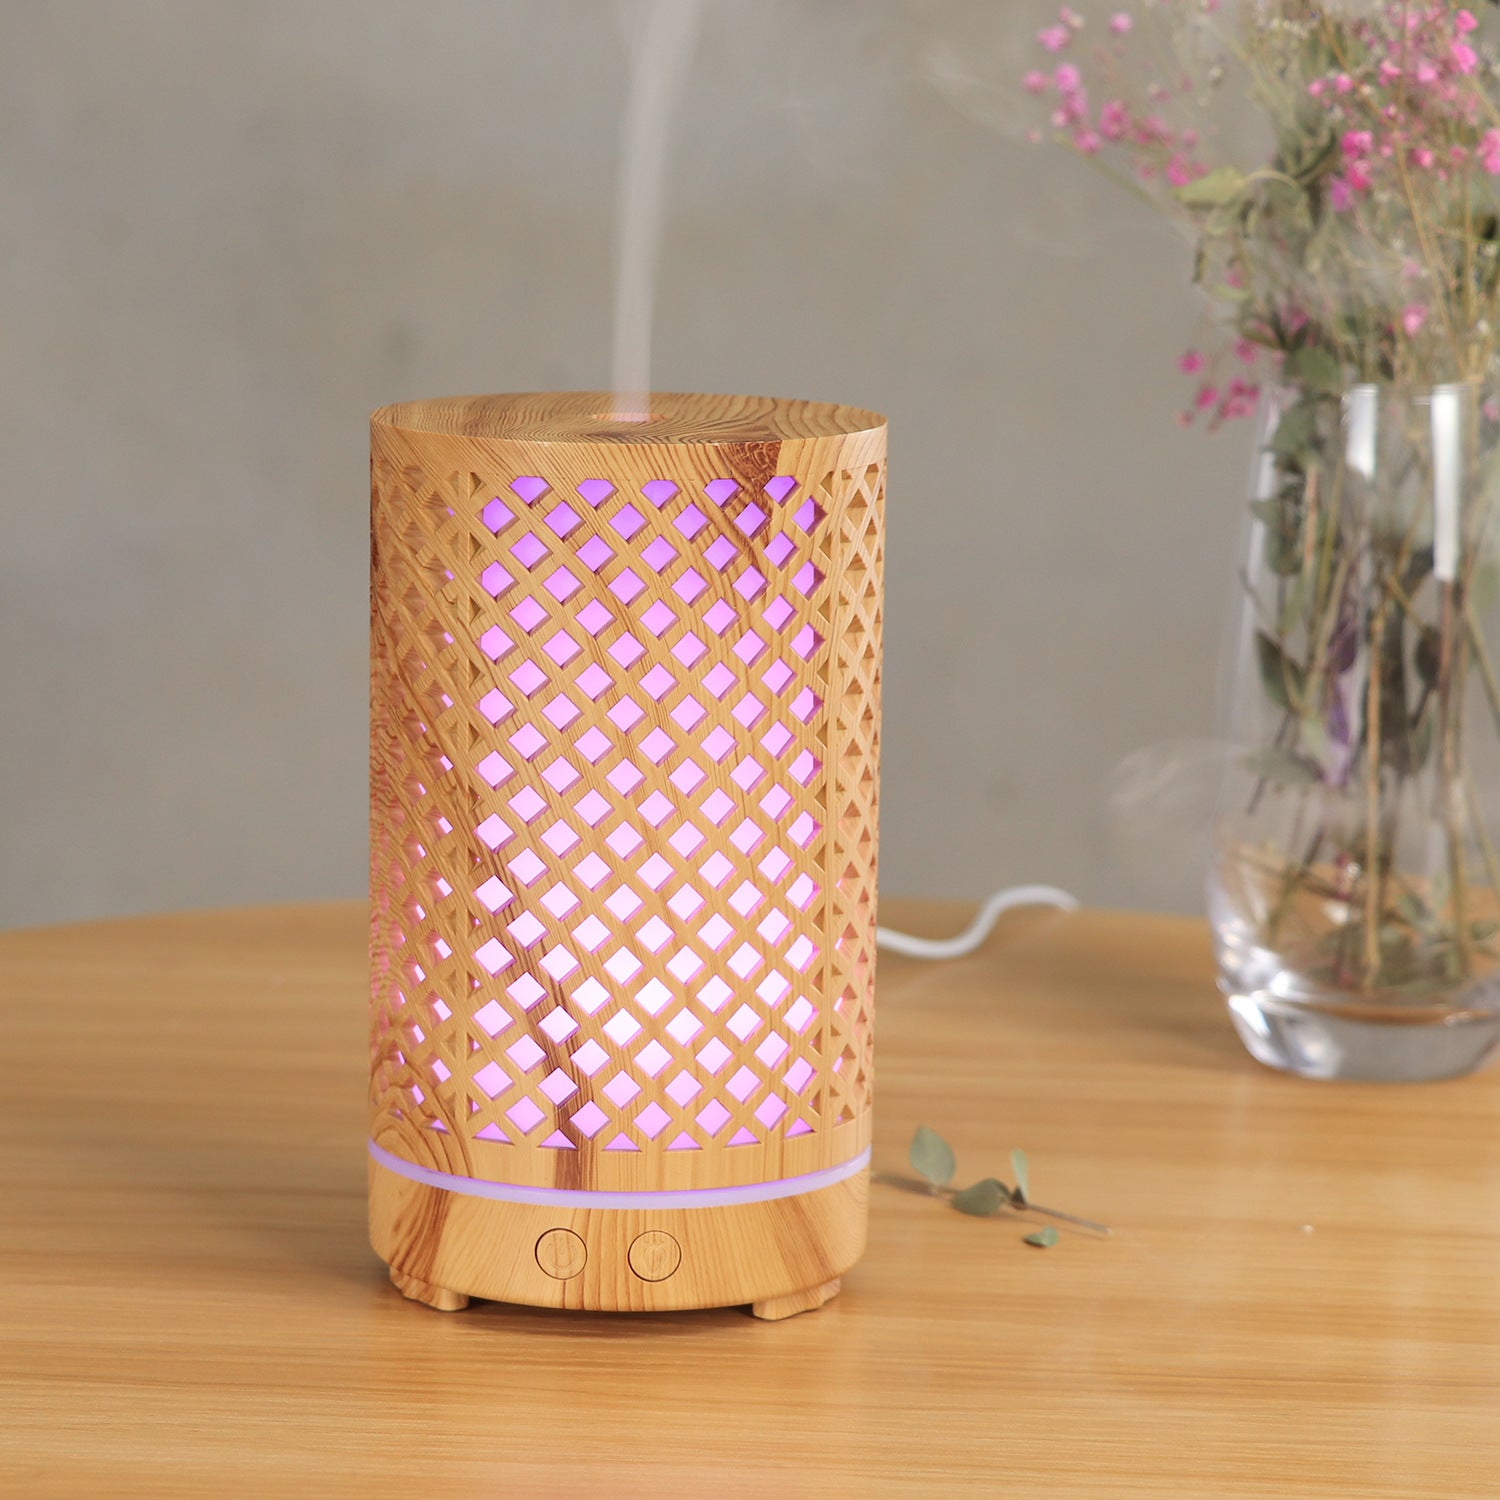 Hollow Aroma Diffuser Ultrasonic Atomizer Household Humidifier